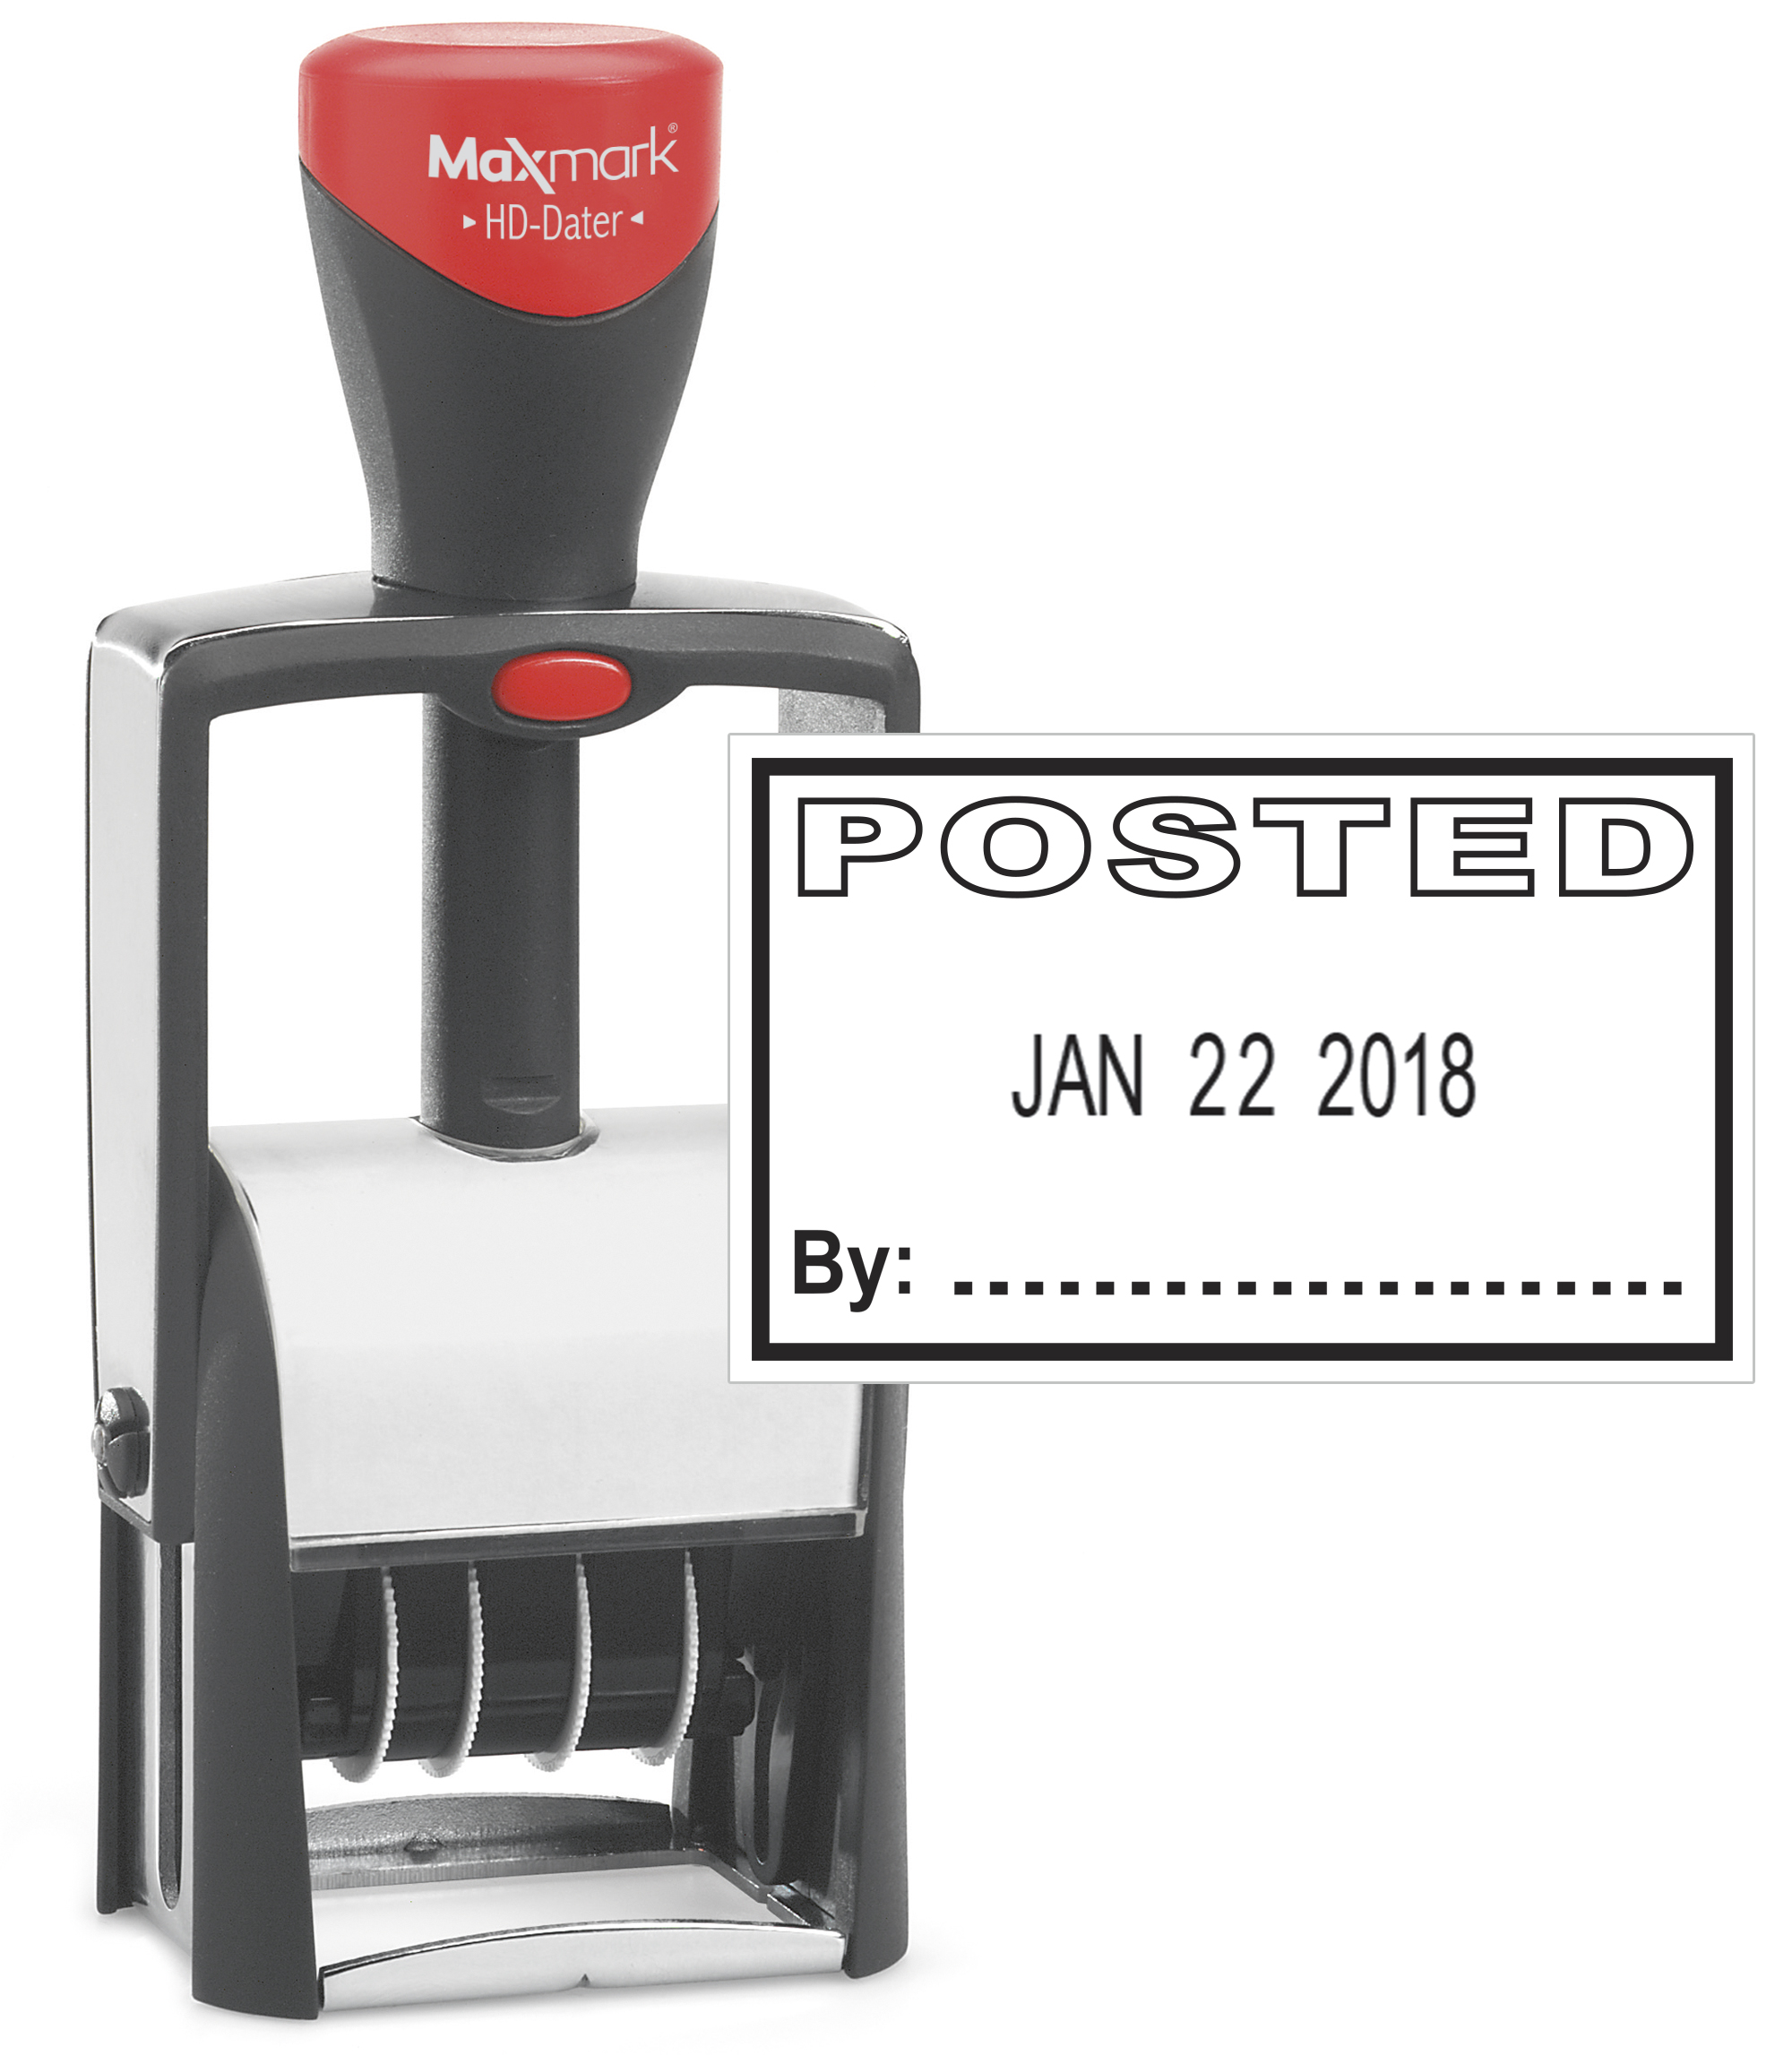 Heavy Duty Date Stamp with "POSTED" Self Inking Stamp - BLACK Ink